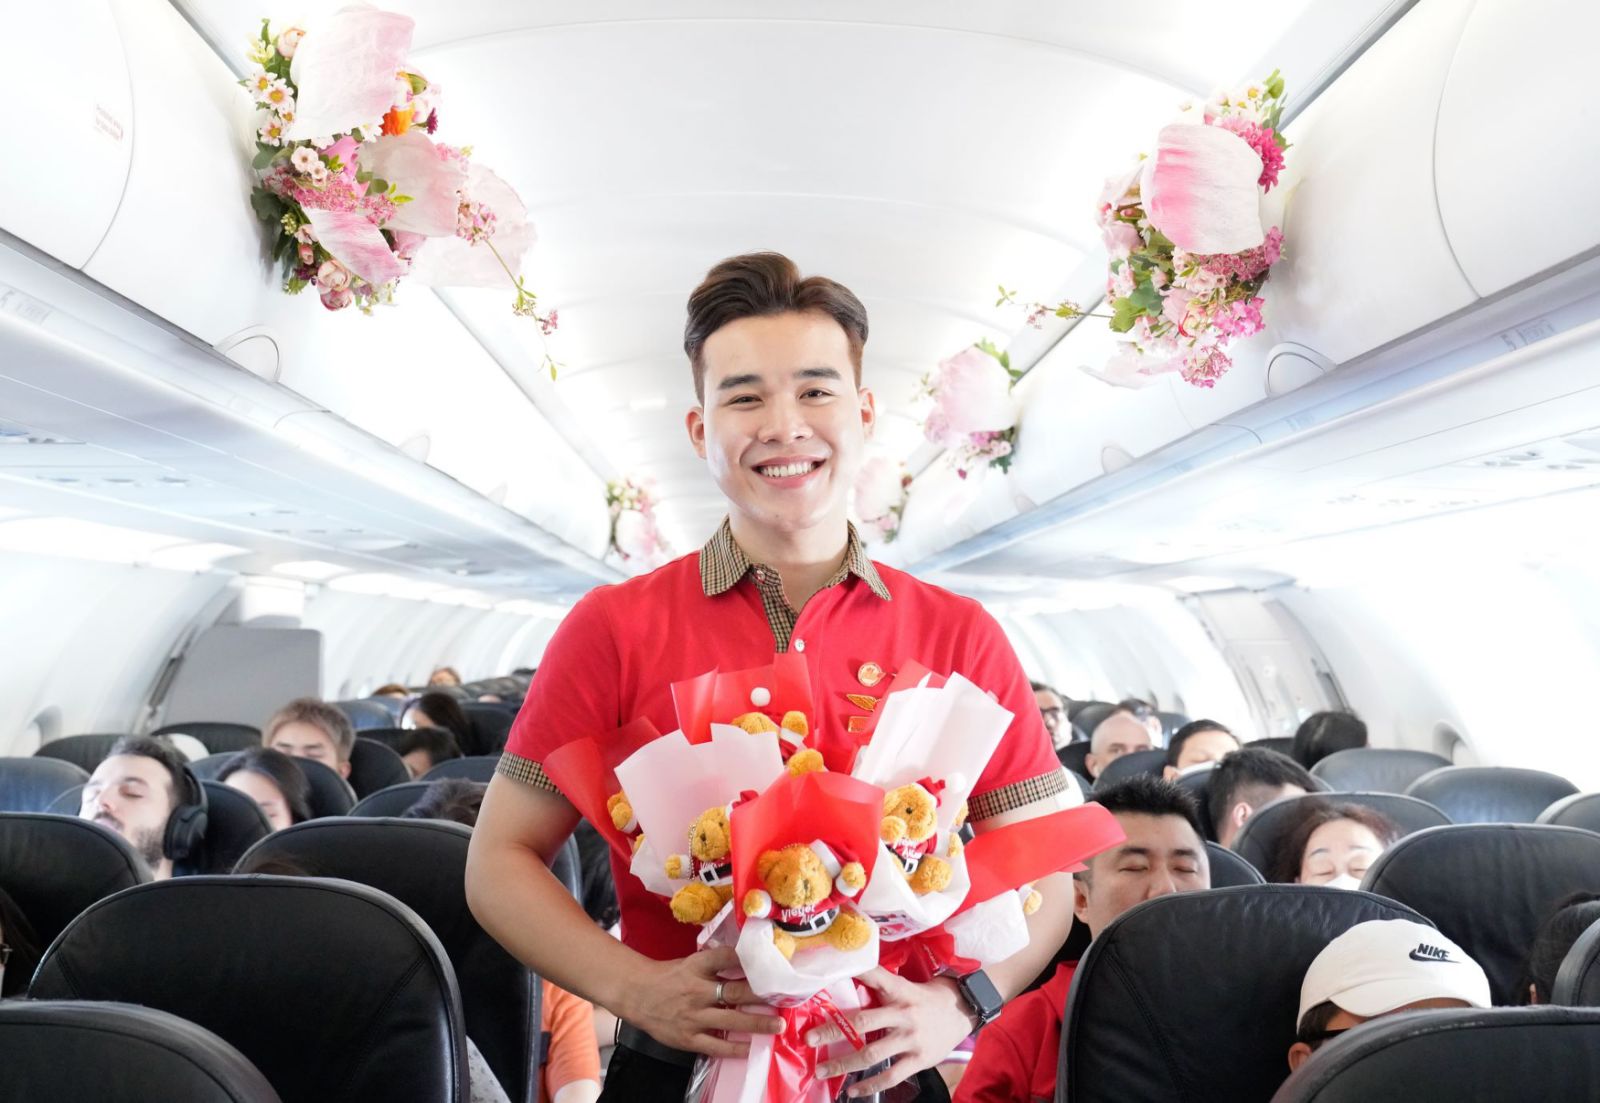 A person holding a bouquet of flowers in an airplane  Description automatically generated